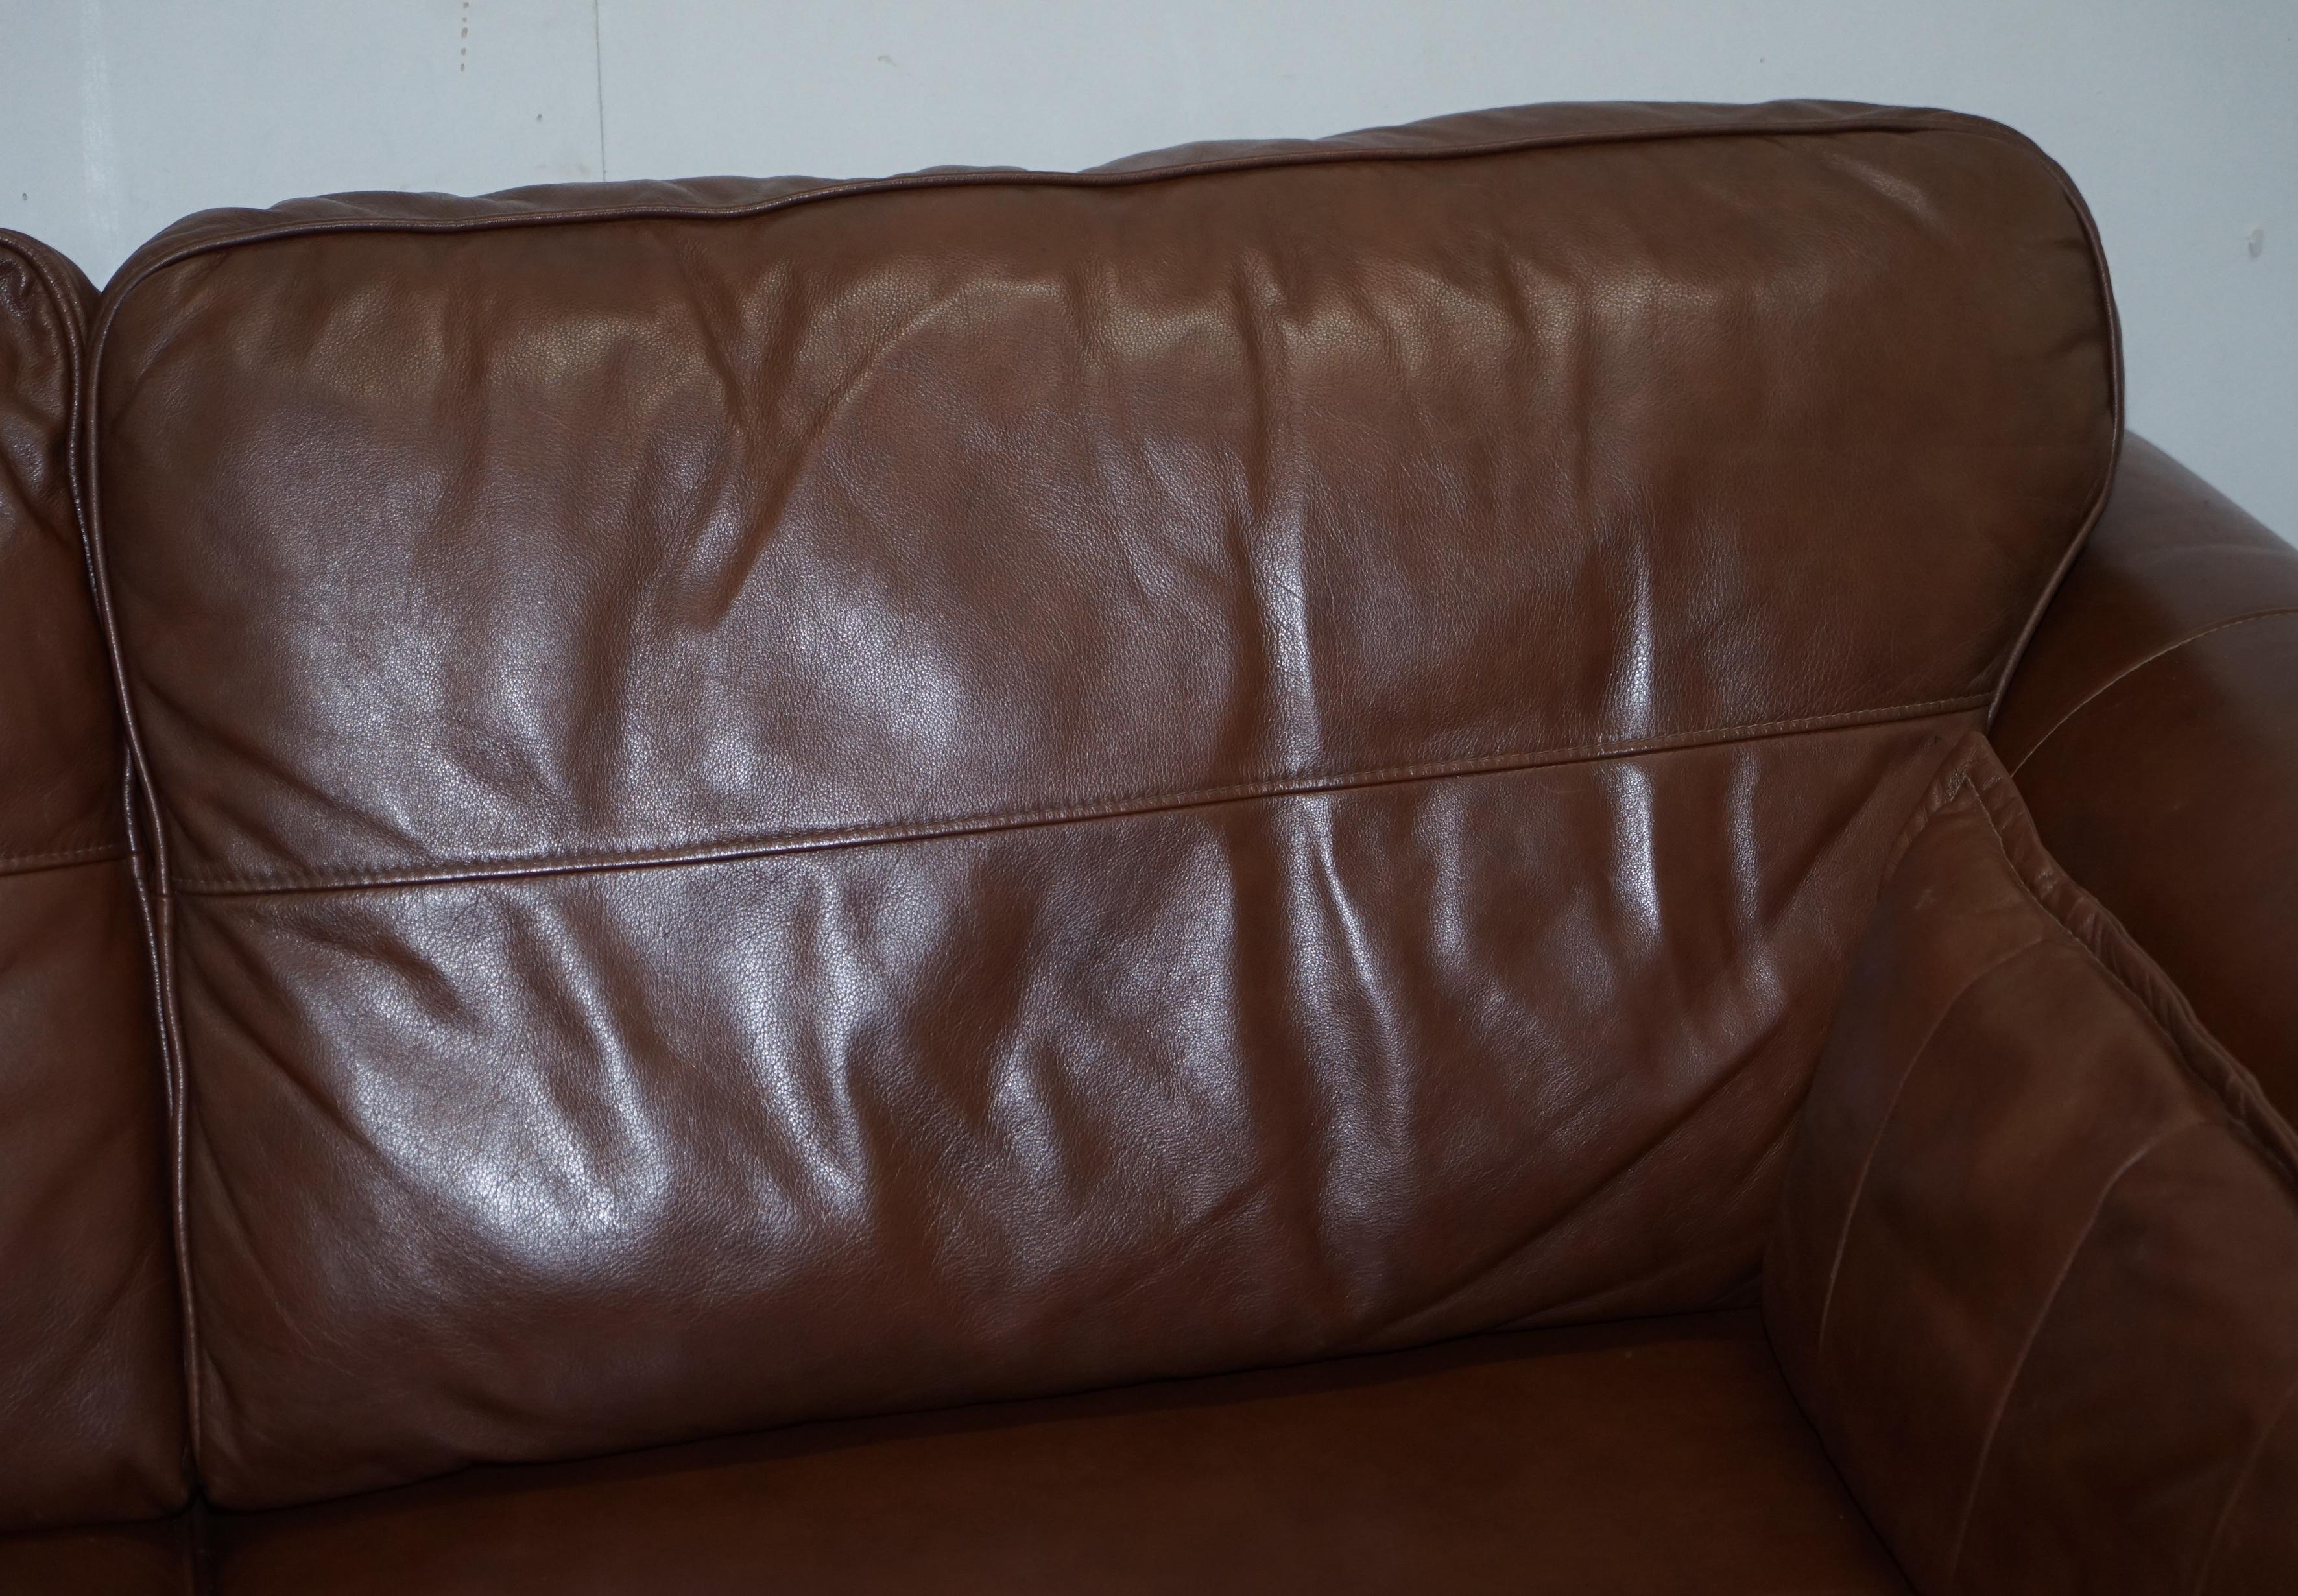 20th Century Contemporary Brown Leather Large Comfortable Three Seat Sofa Part of Large Suite